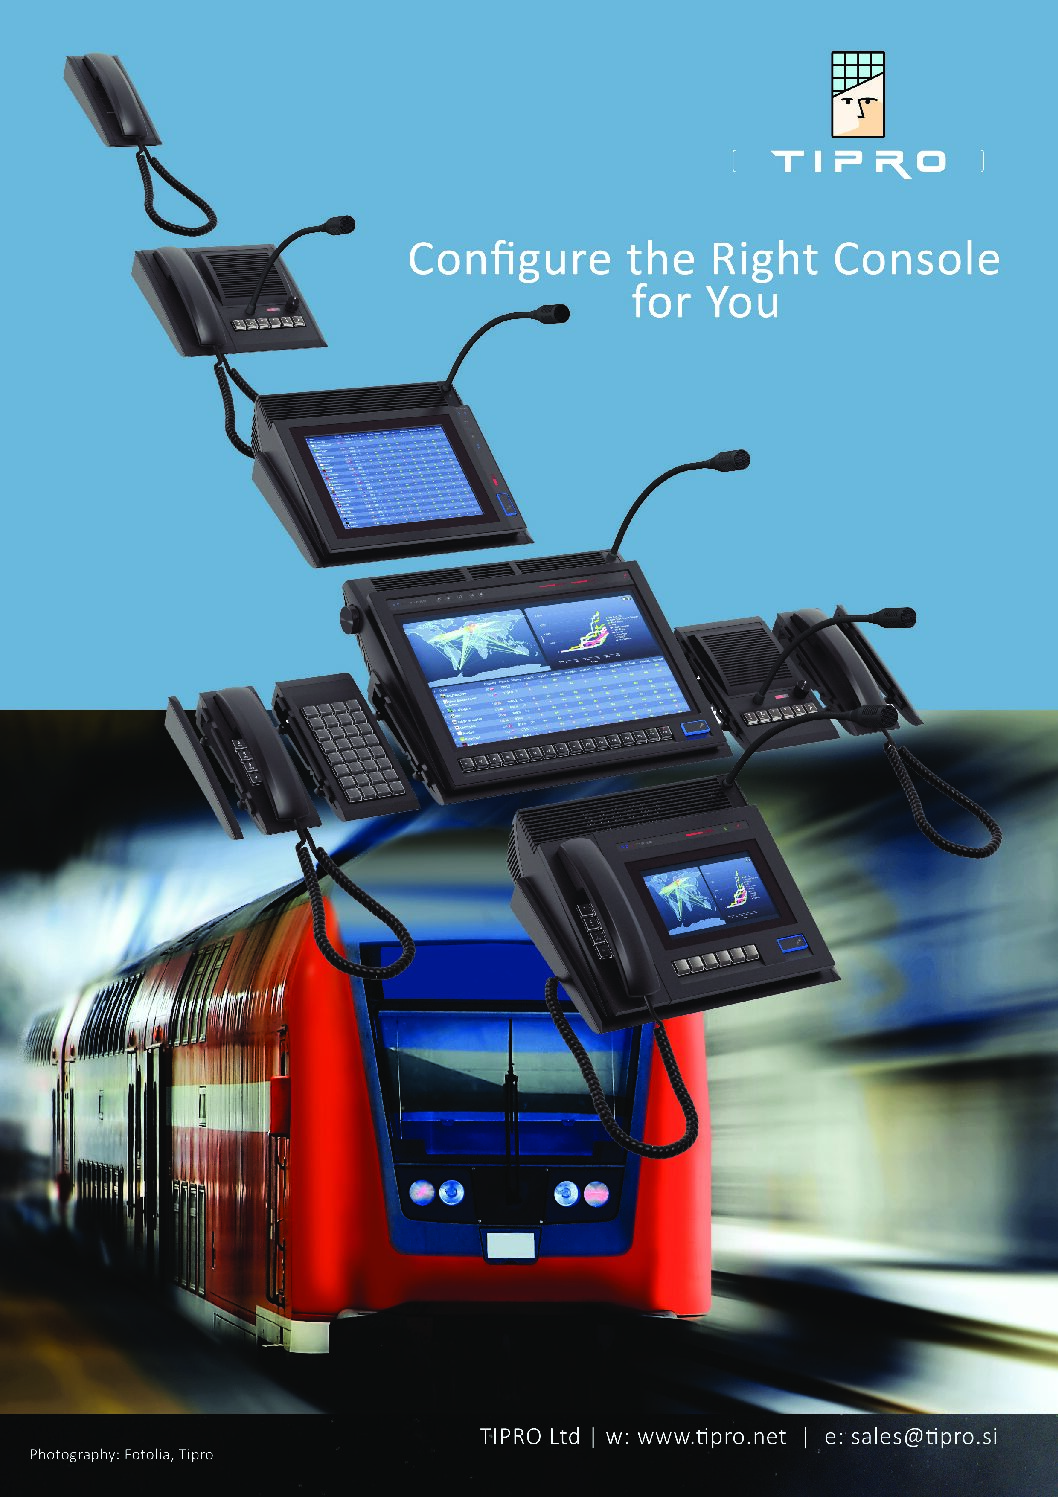 Voice Communication Is an Important Part of Rail Traffic Control – Why Choose TIPRO?